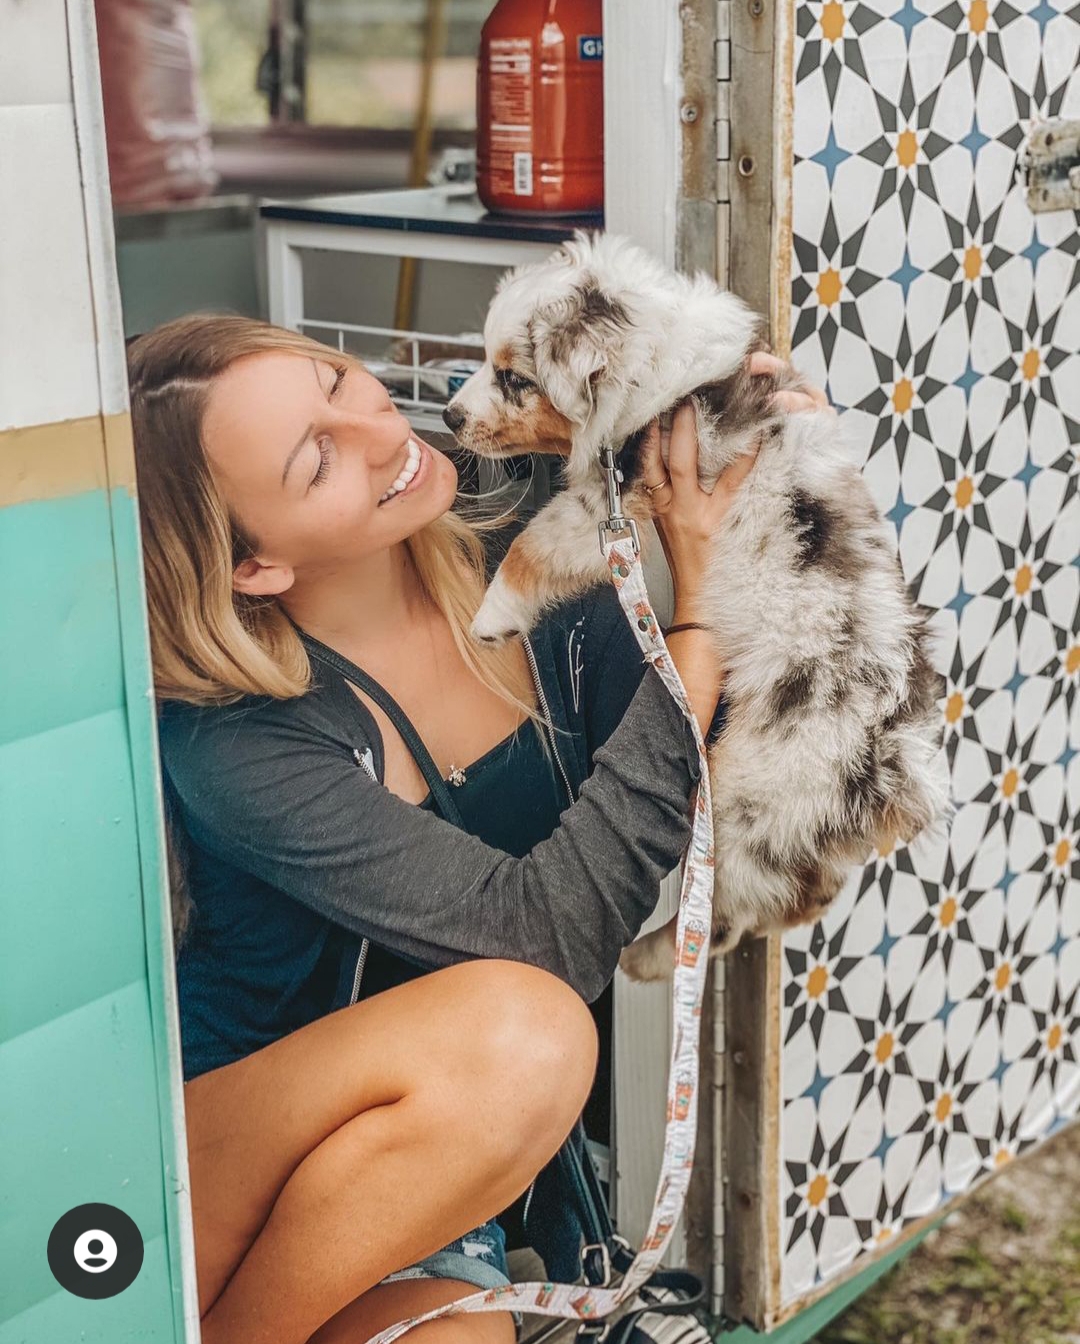 Morning Magnolia Coffee Shop Owner Paige and her new team member dog Brew